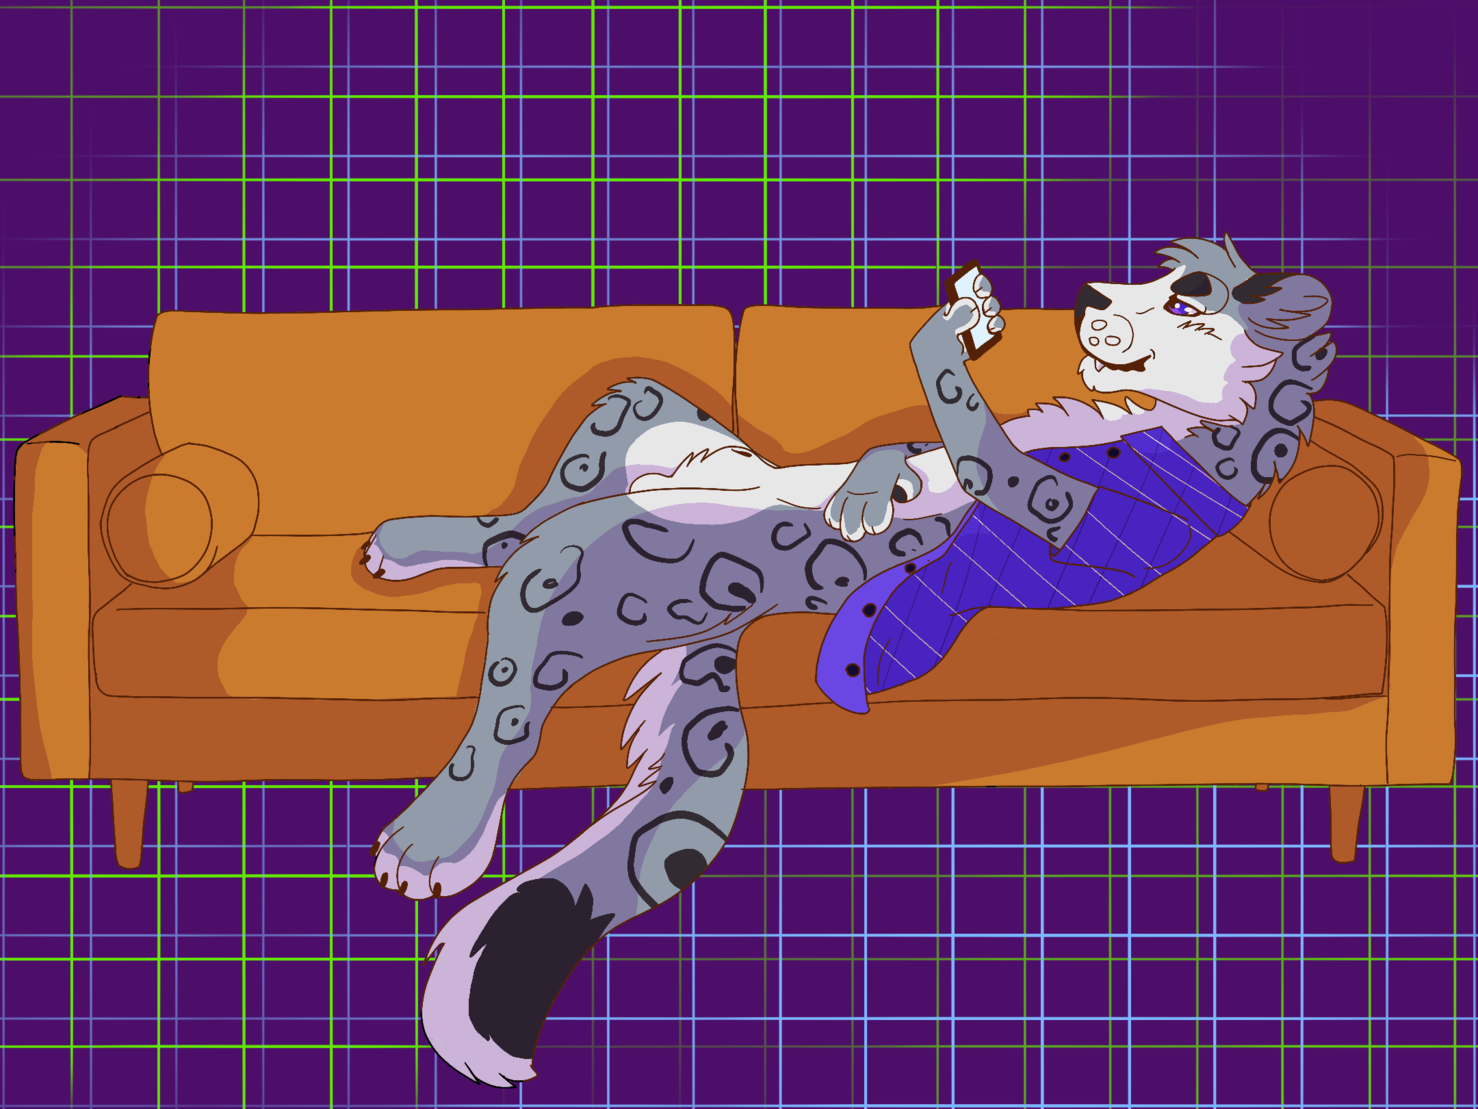 Ax laying on a couch, smiling at his phone. He's only wearing an open button-up shirt. Click to see full image.